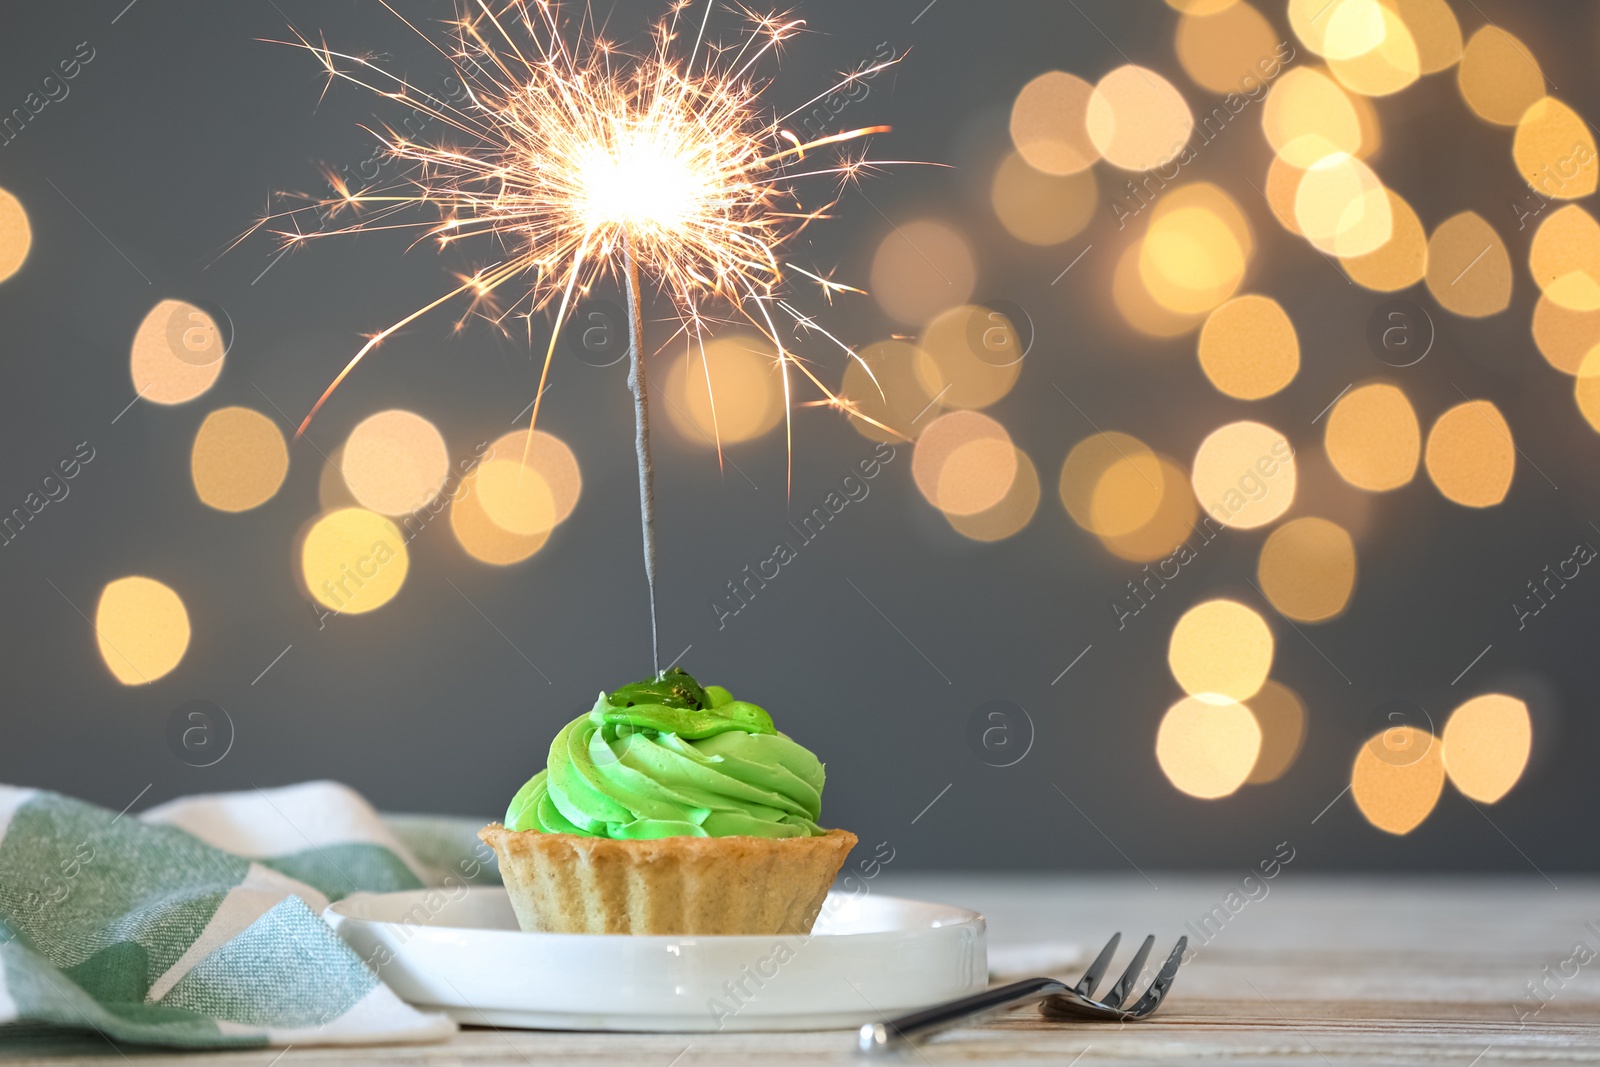 Photo of Cupcake with burning sparkler on table against blurred festive lights. Space for text